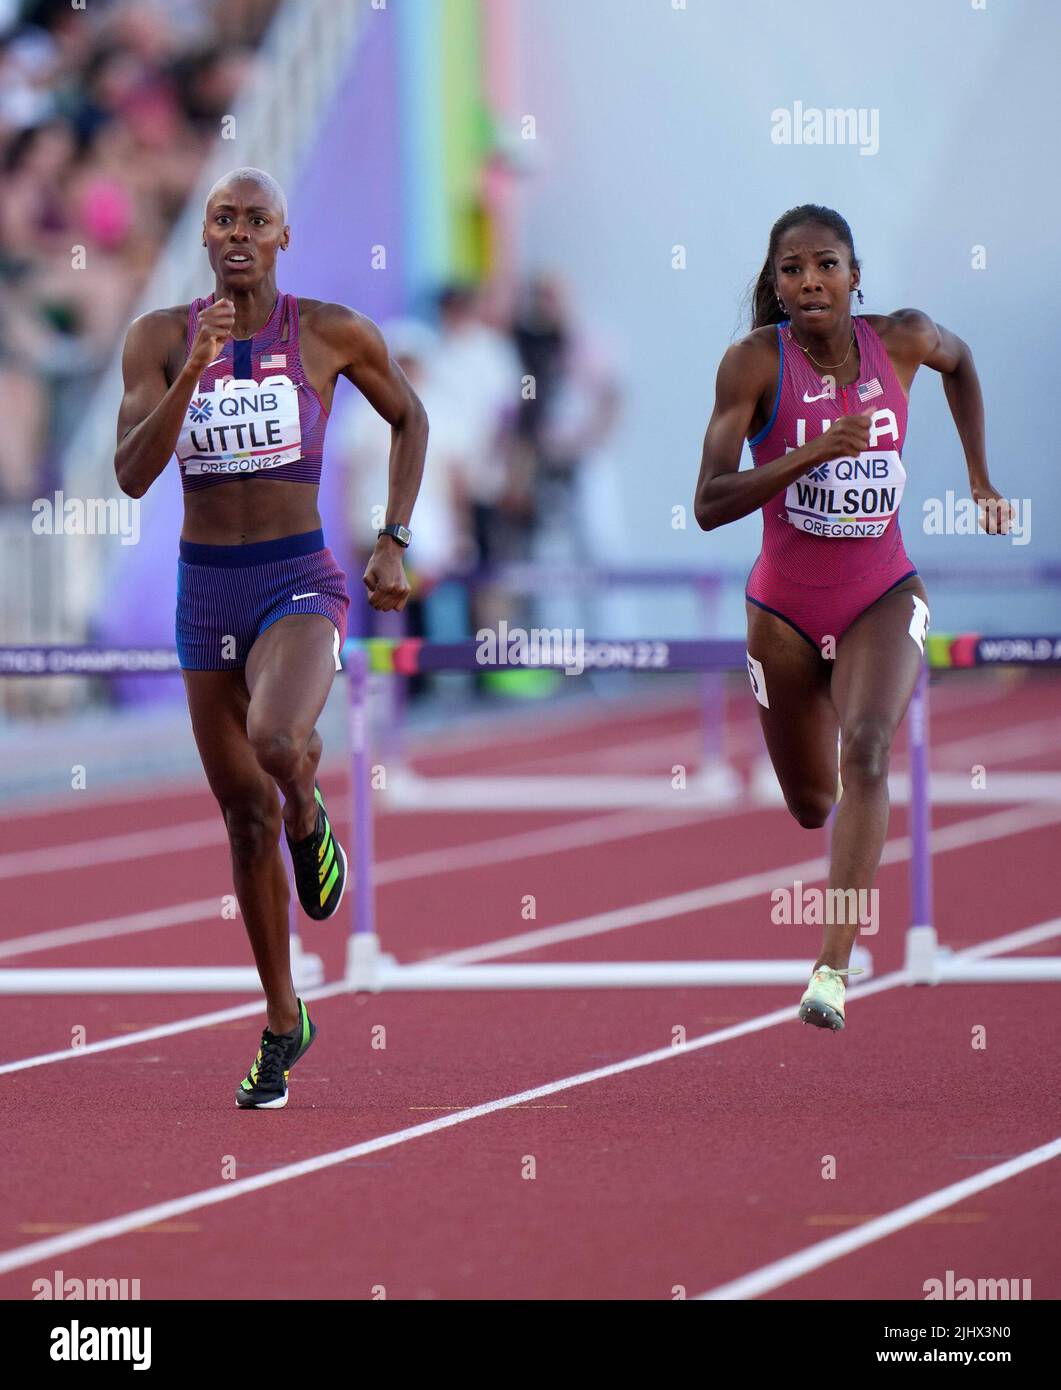 Eugene, USA. 20th July, 2022. Britton Wilson (R) of the United States competes with her compatriot Shamier Little during the women's 400m hurdles semifinal at the World Athletics Championships Oregon22 in Eugene, Oregon, the United States, July 20, 2022. Credit: Wang Ying/Xinhua/Alamy Live News Stock Photo